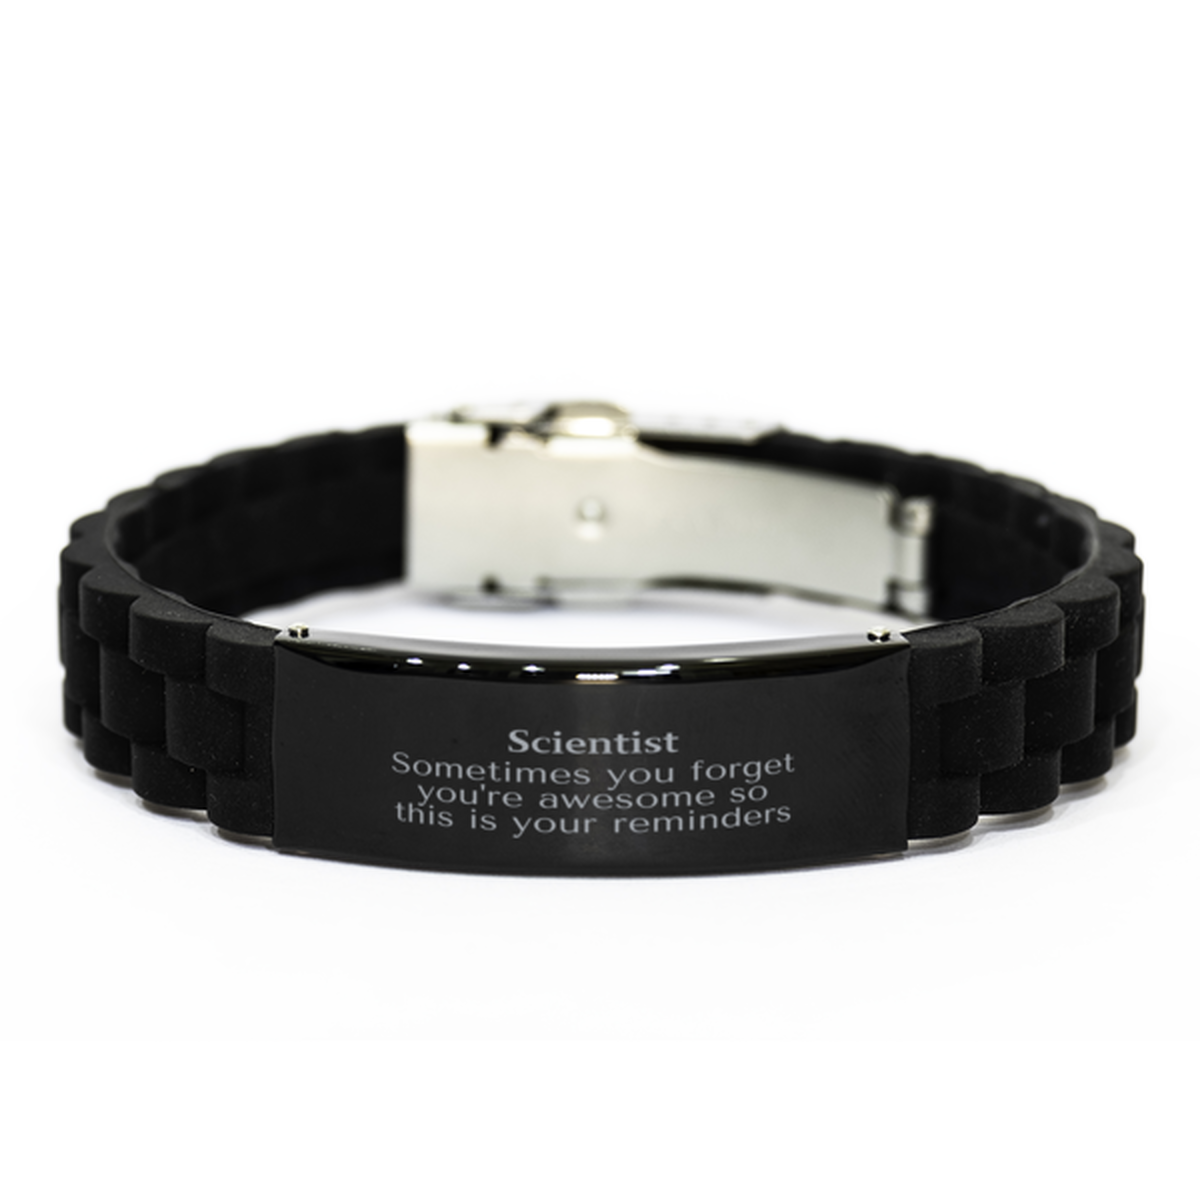 Sentimental Scientist Black Glidelock Clasp Bracelet, Scientist Sometimes you forget you're awesome so this is your reminders, Graduation Christmas Birthday Gifts for Scientist, Men, Women, Coworkers